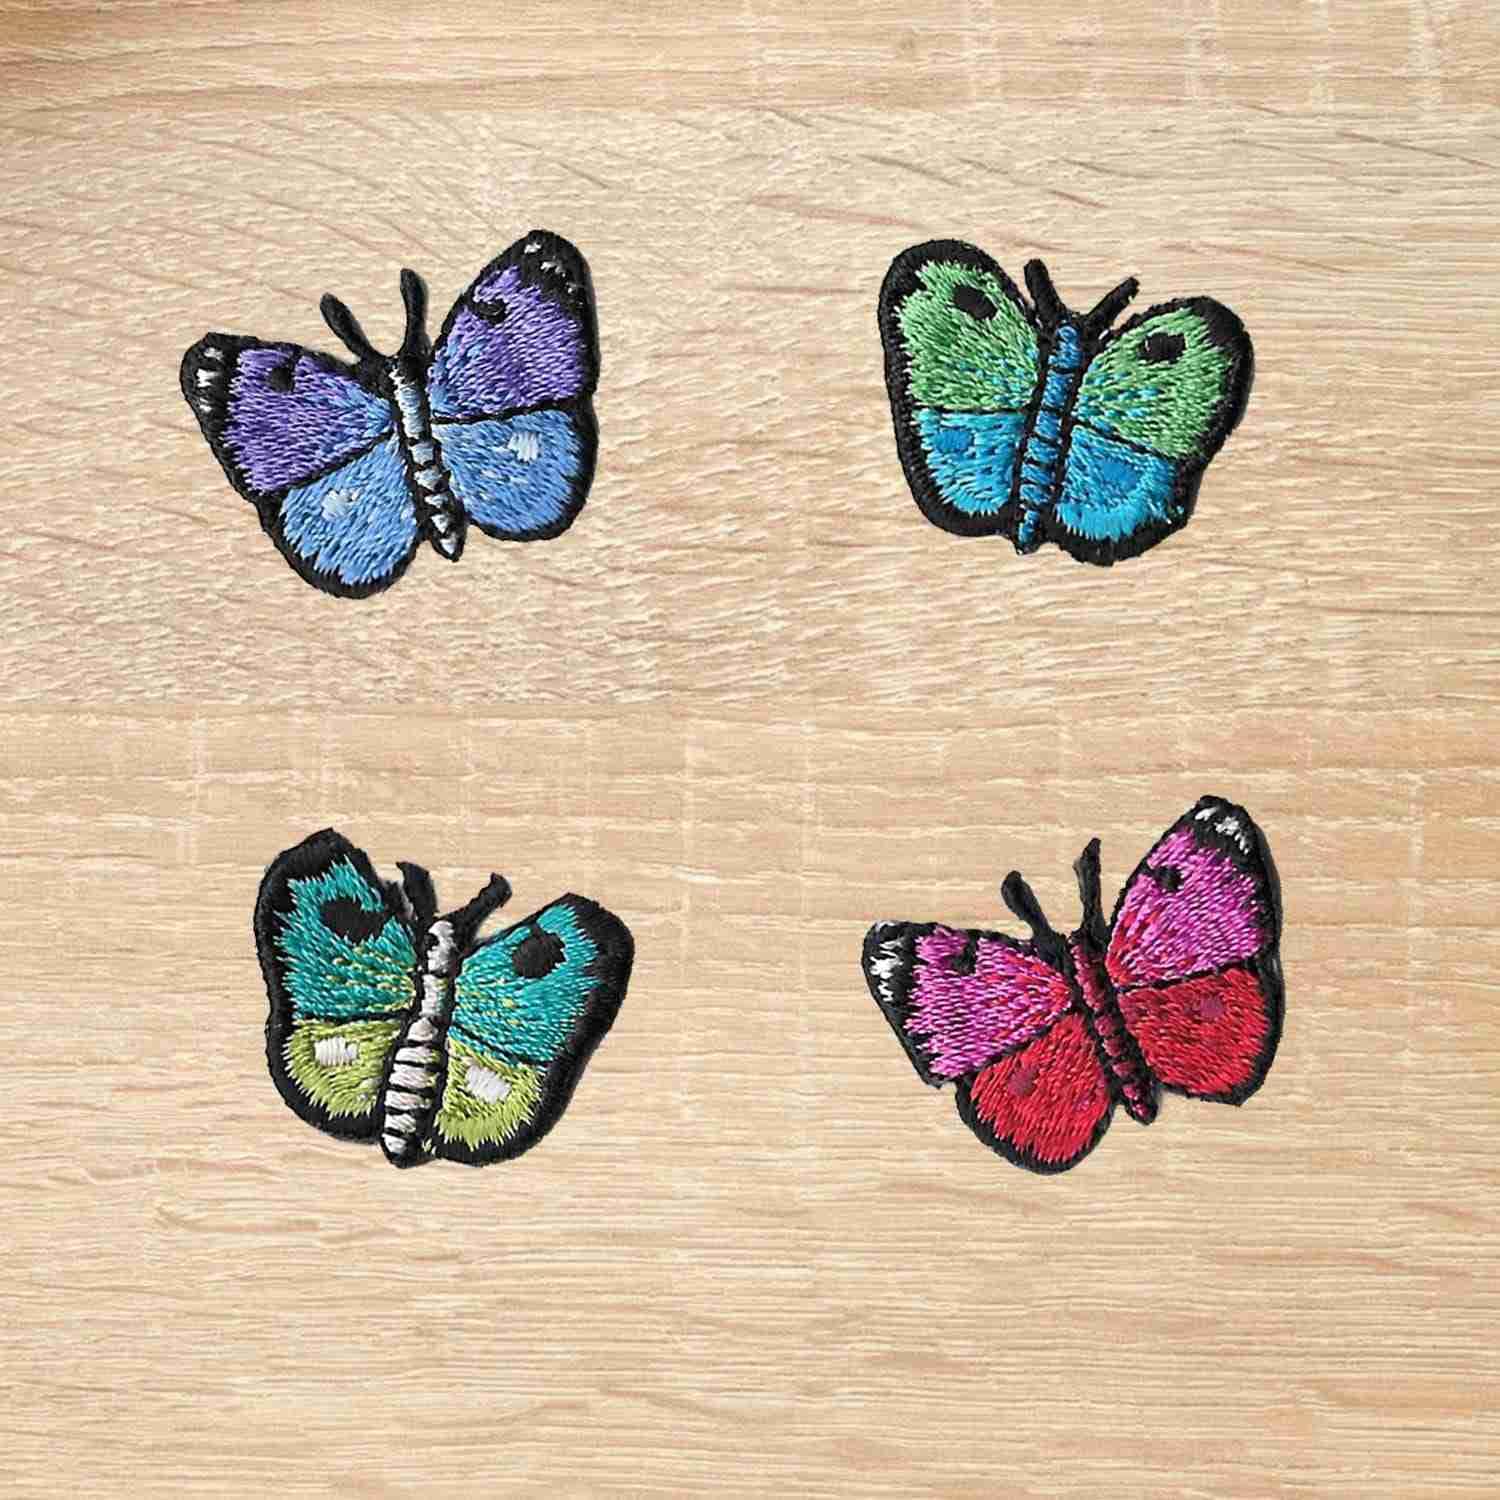 Embroidered Butterfly Applique Turquoise Black